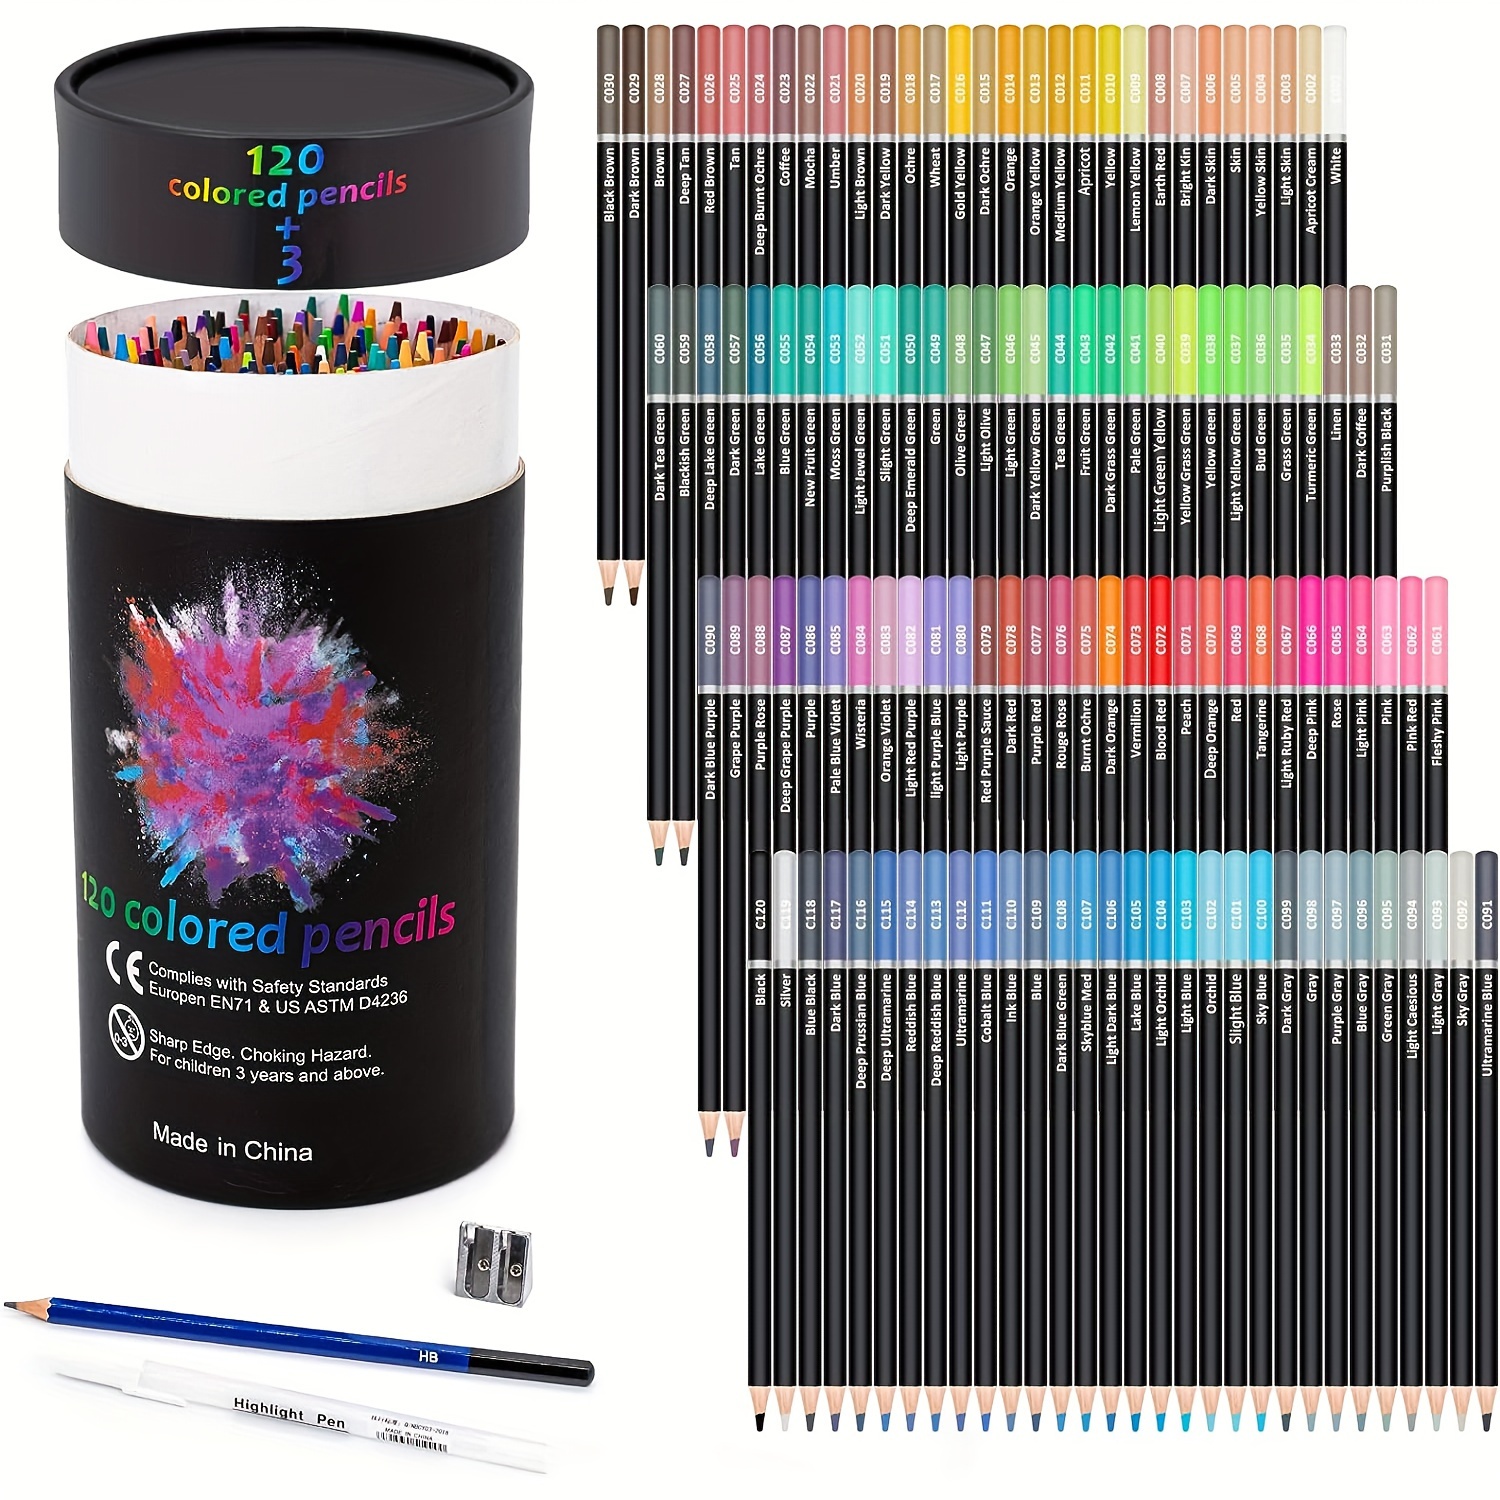 Soucolor 72-Color Colored Pencils for Adult Coloring Books, Soft Core,  Artist Sketching Drawing Pencils Art Craft Supplies, Coloring Pencils Set  Gift for Adults Kids Beginners 